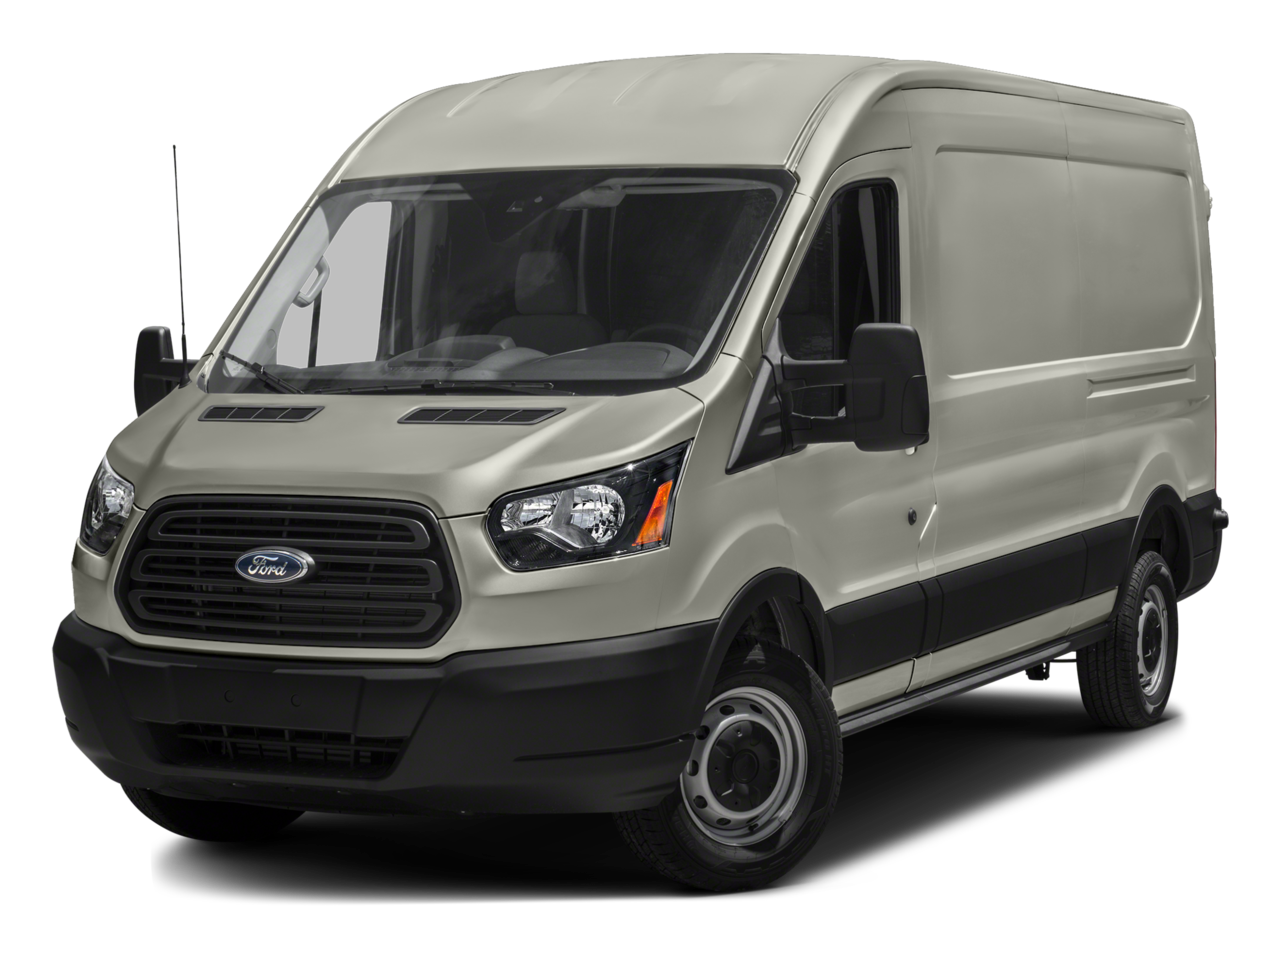 2016 Ford Transit-250 Repair: Service and Maintenance Cost